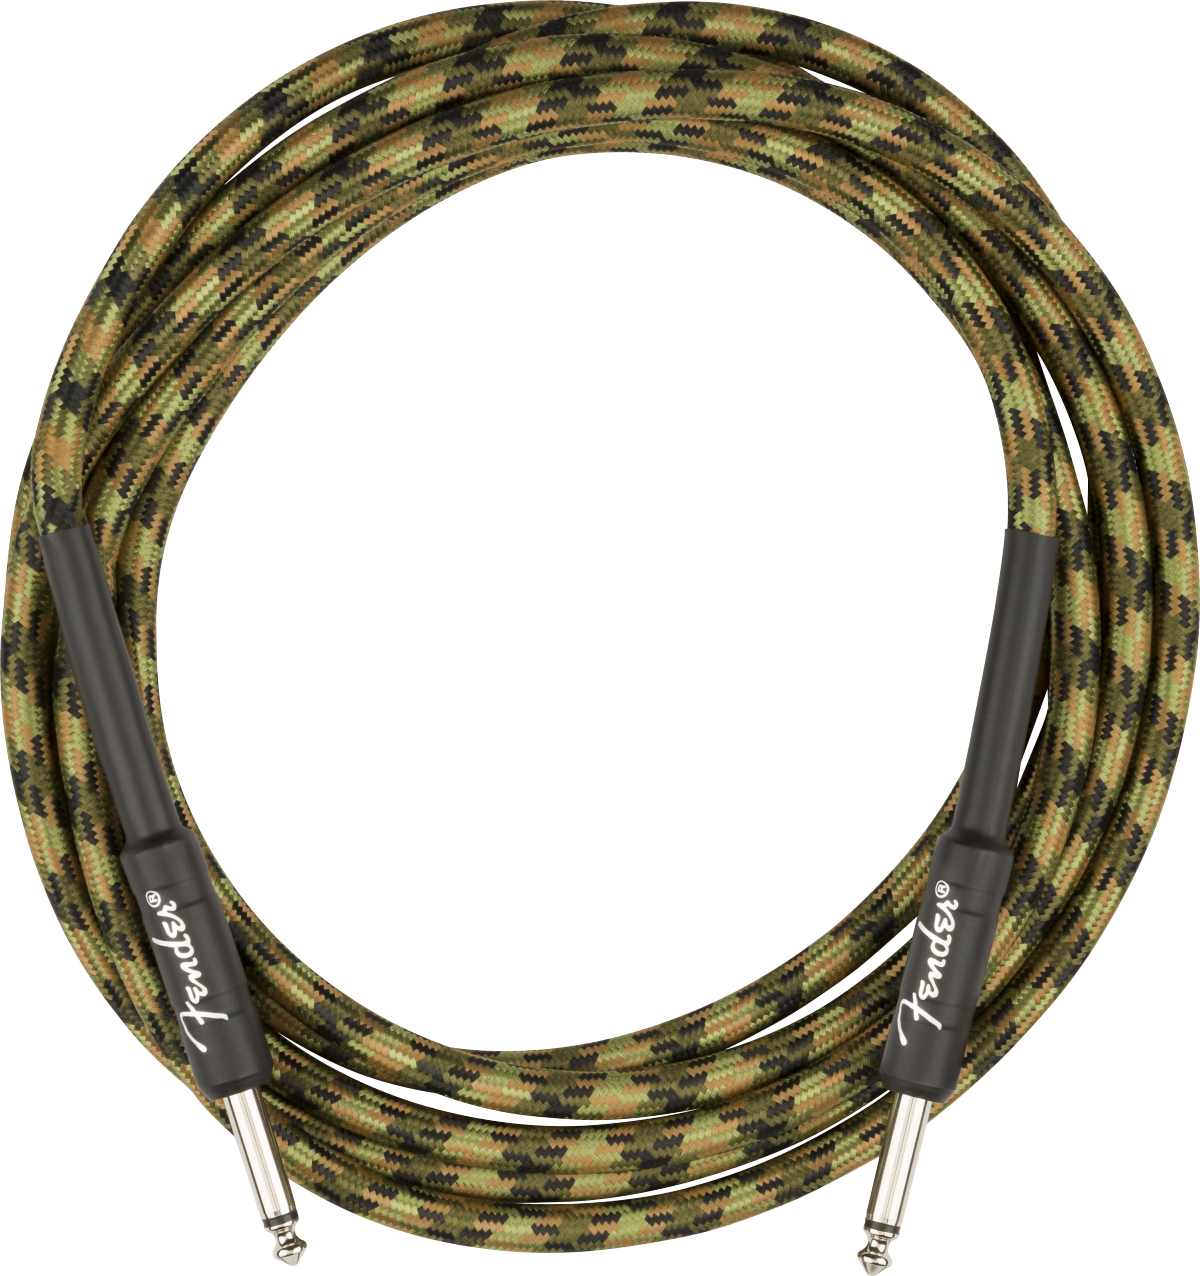 Fender Professional Series Instrument Cable, Straight/Straight, 18.6', Woodland Camo